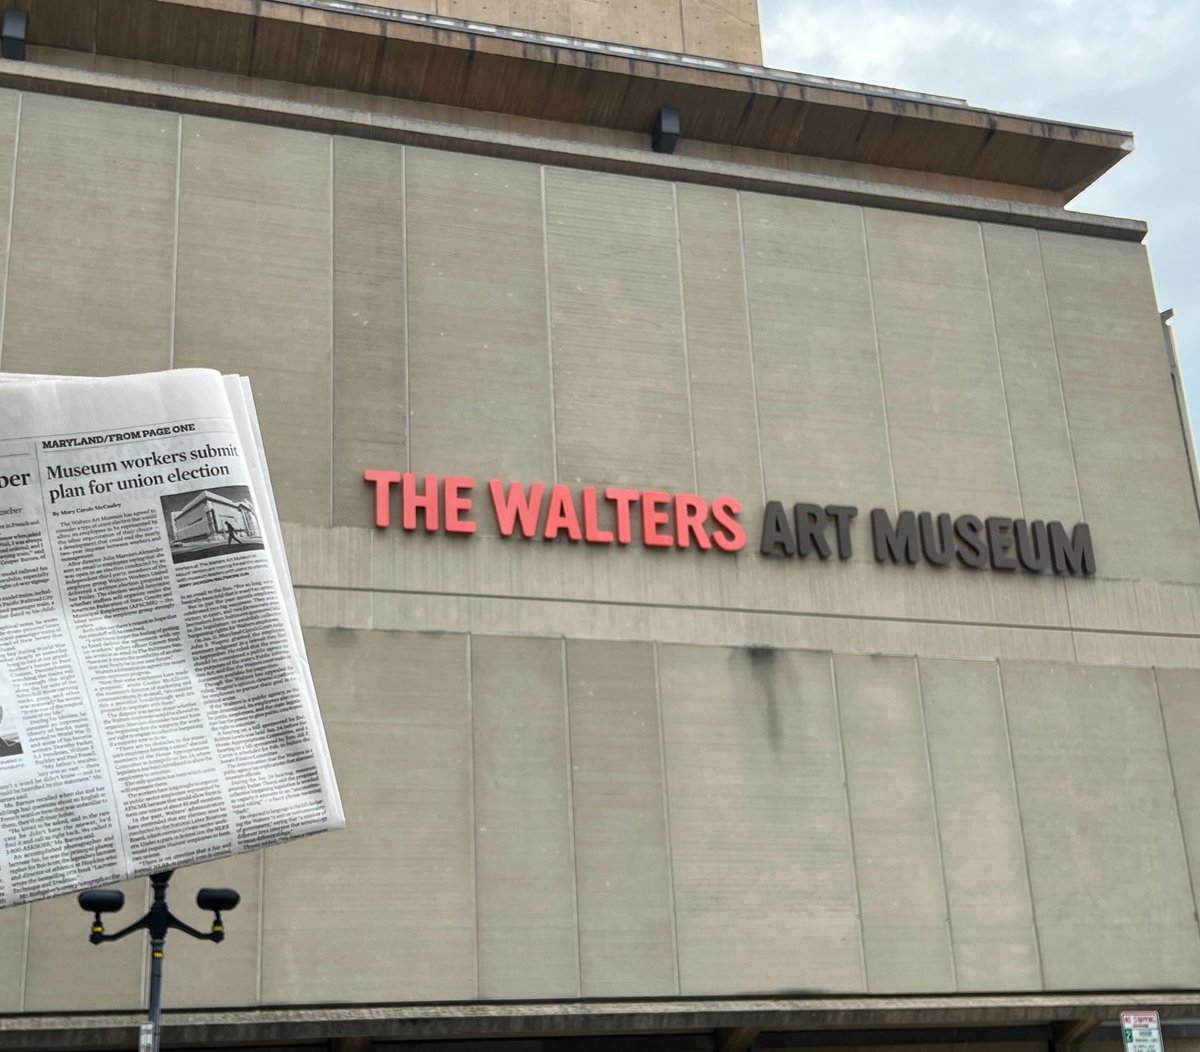 Check out the @baltimoresun ‘s coverage of recent progress in our campaign, including our collective bargaining legislation and the election proposal we delivered to our museum director last week. 

#WaltersWorkersUnited #waltersartmuseum #unionpower #baltimoreisauniontown